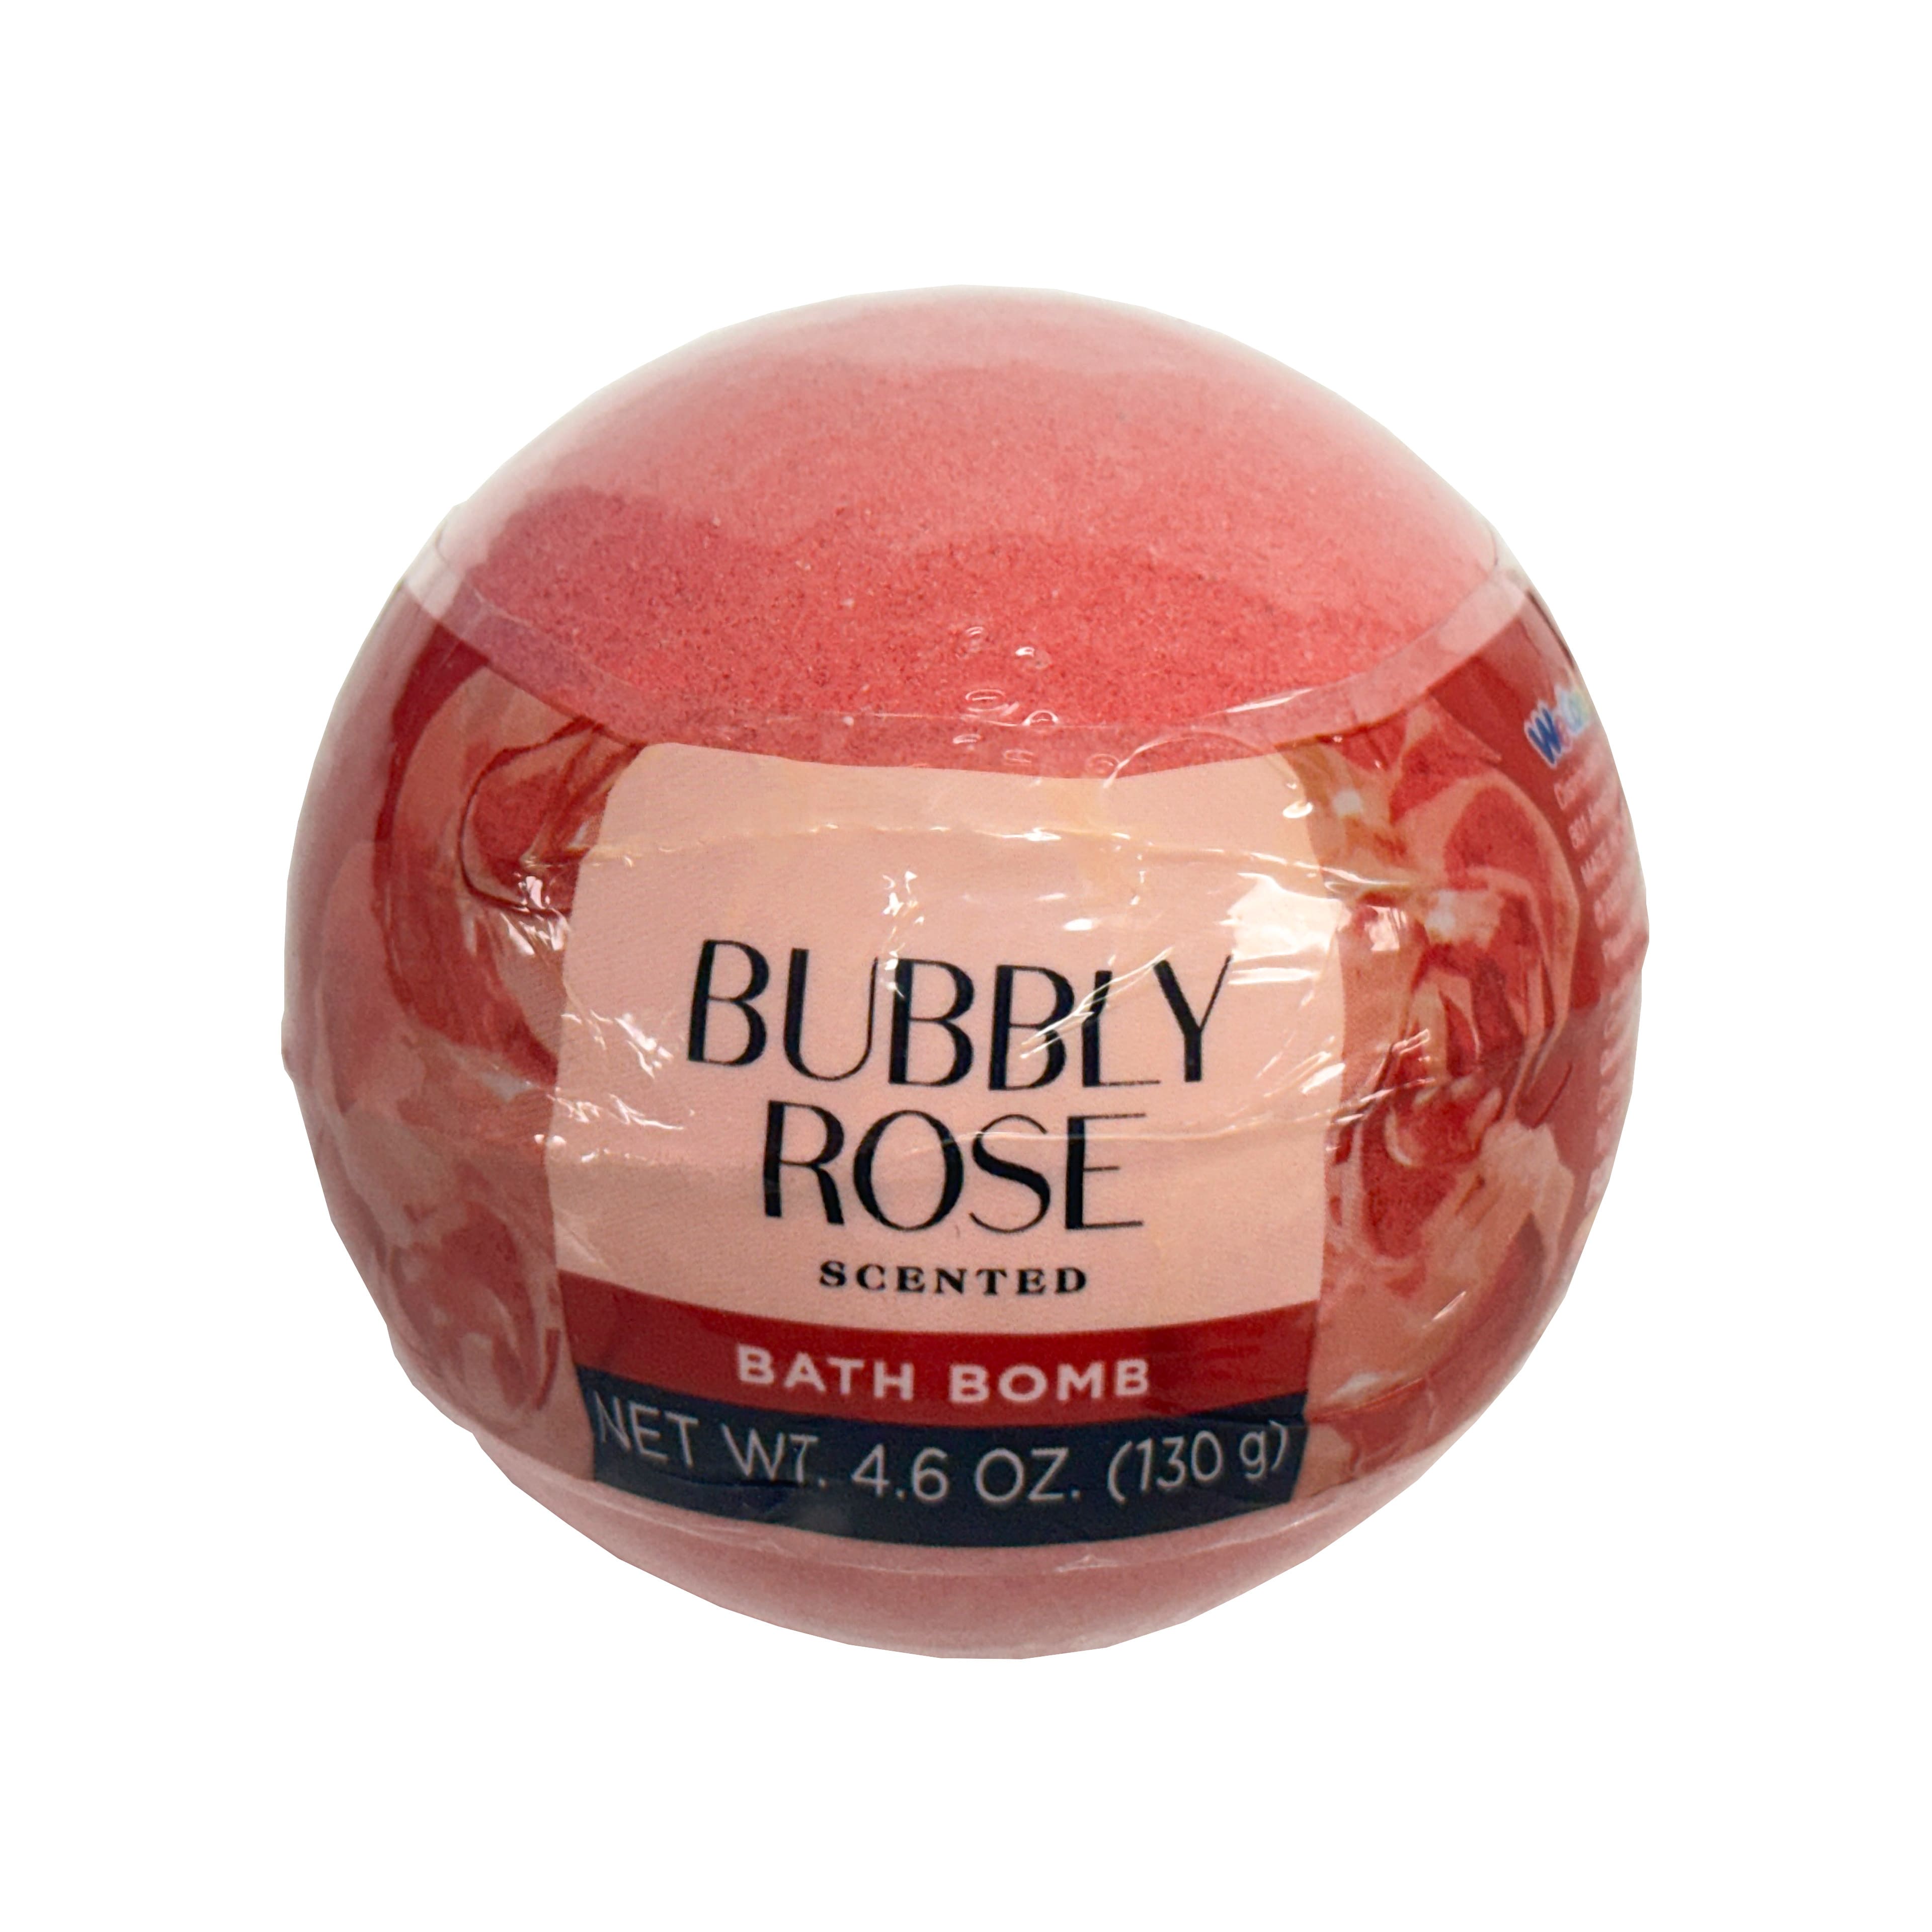 Bubbly Rose Scented Bath Bomb